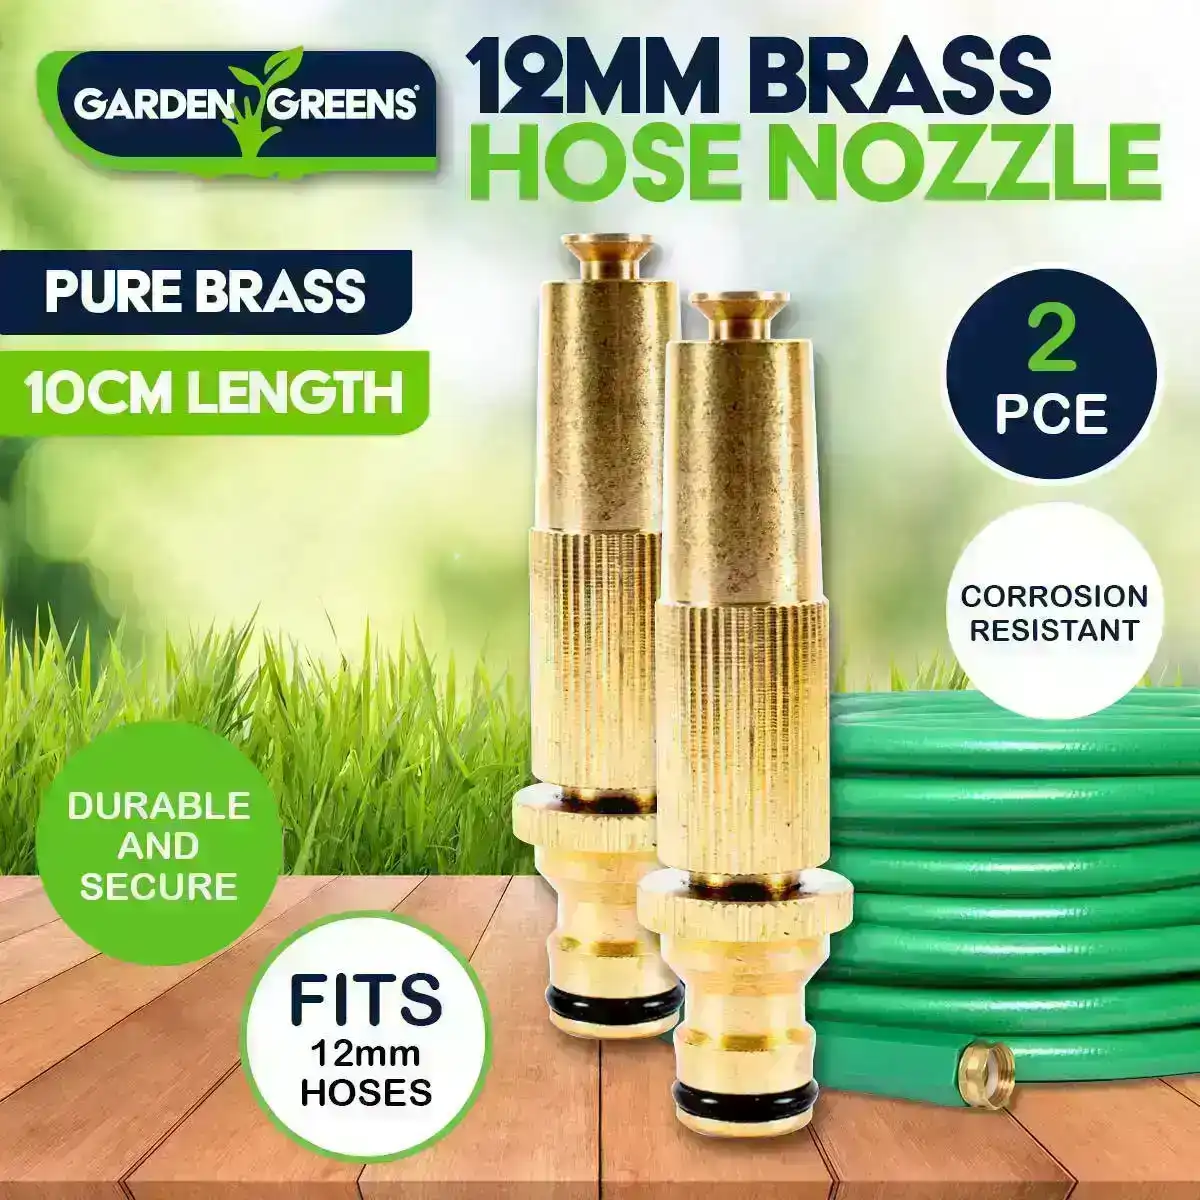 Garden Greens® 2PCE Hose Nozzle Pure Brass with Adjustable Flow Rust Proof